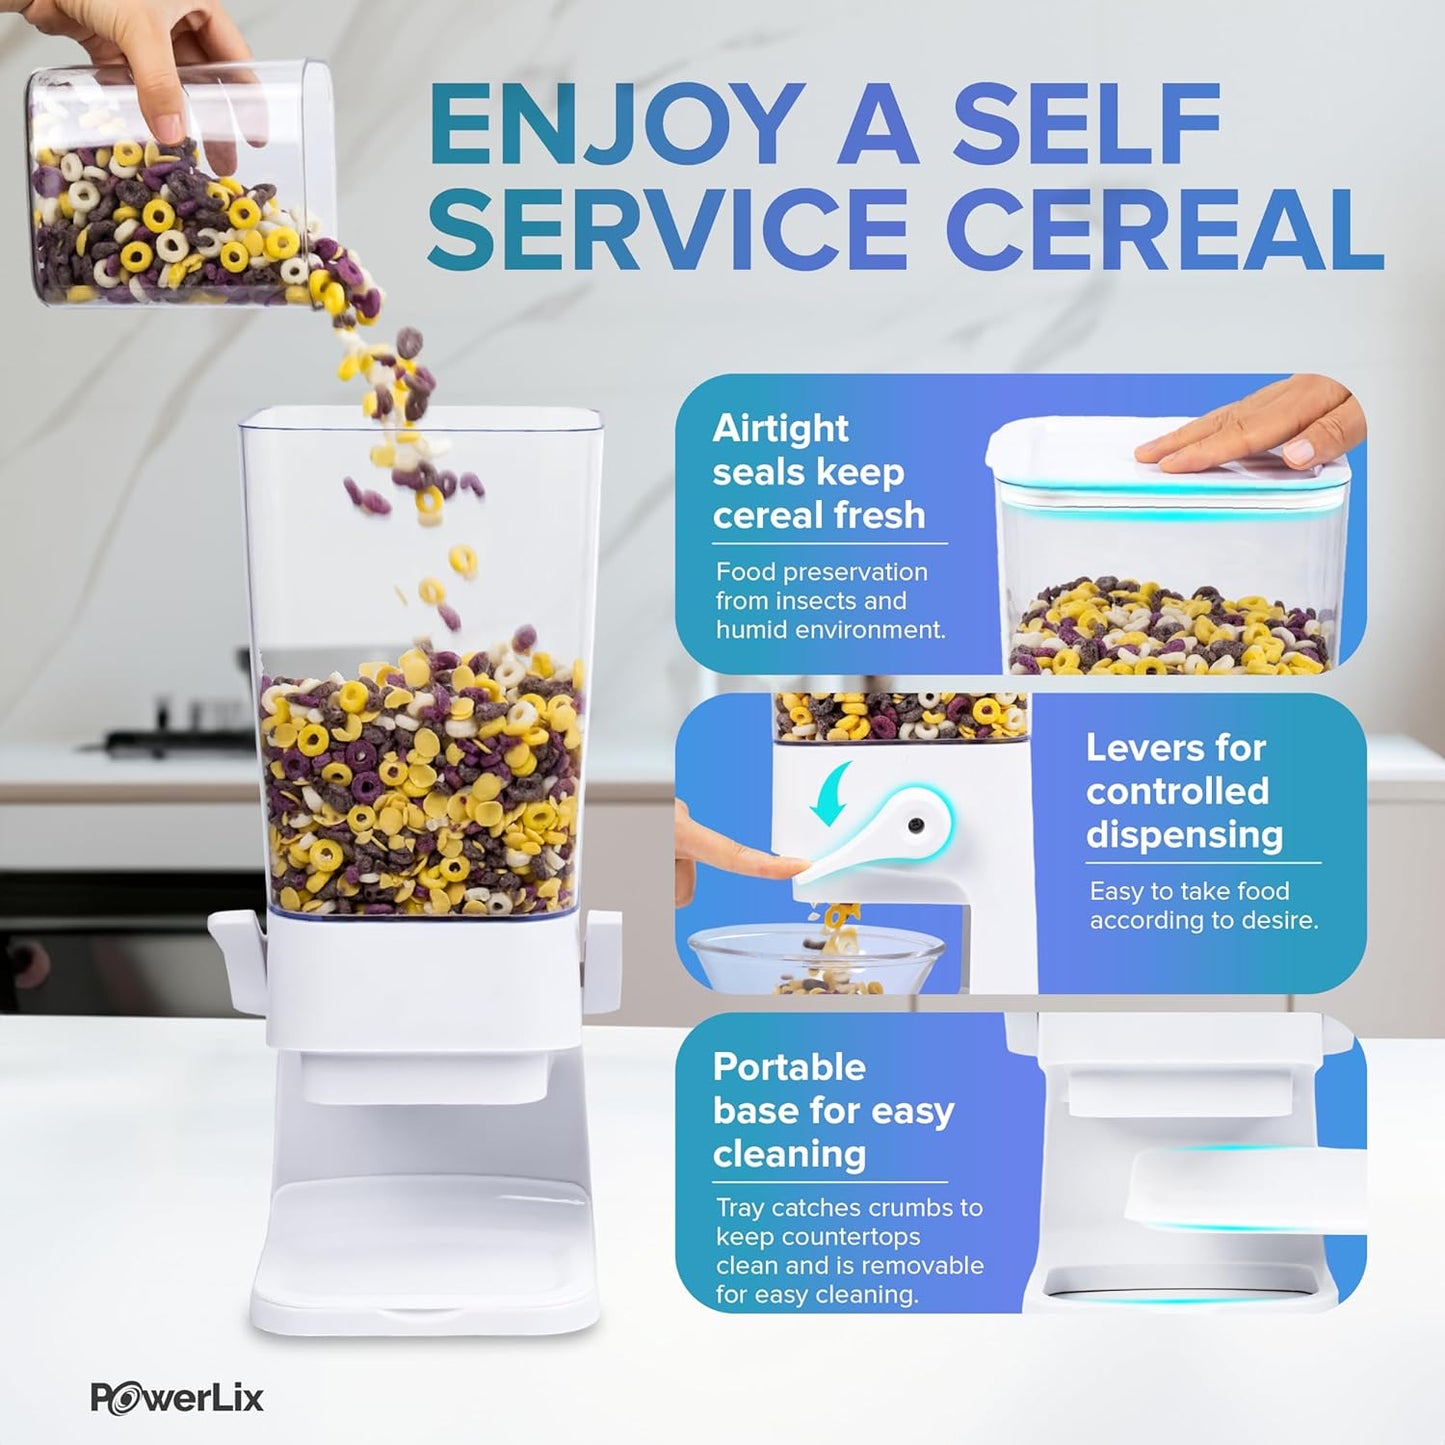 a cereal being poured into a container with text: 'ENJOY A SELF SERVICE CEREAL Airtight seals keep cereal fresh Food preservation from insects and humid environment. Levers for controlled dispensing Easy to take food according to desire. Portable base for easy cleaning Tray catches crumbs to keep countertops clean and is removable for easy cleaning. PowerLix'